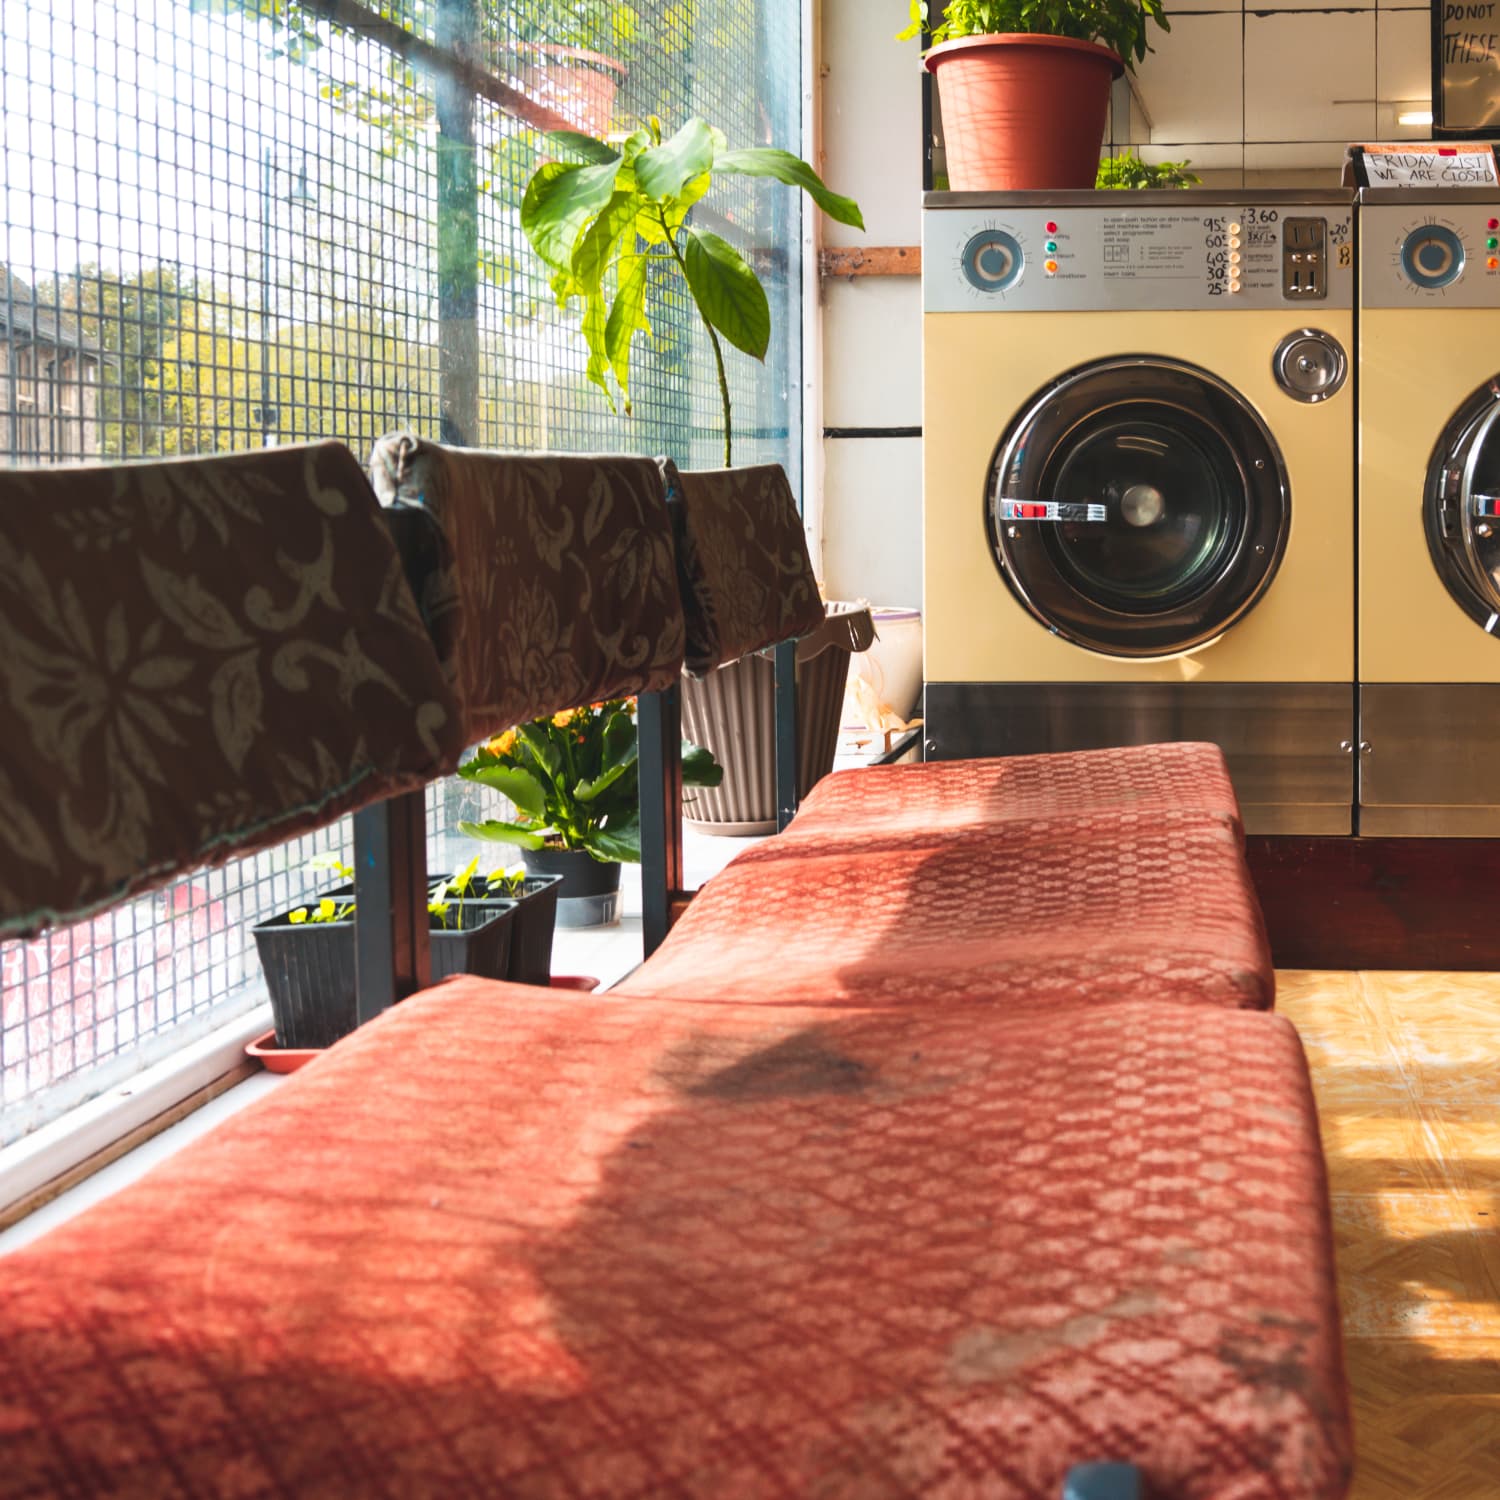 How to do laundry in a shared space or laundromat - Reviewed